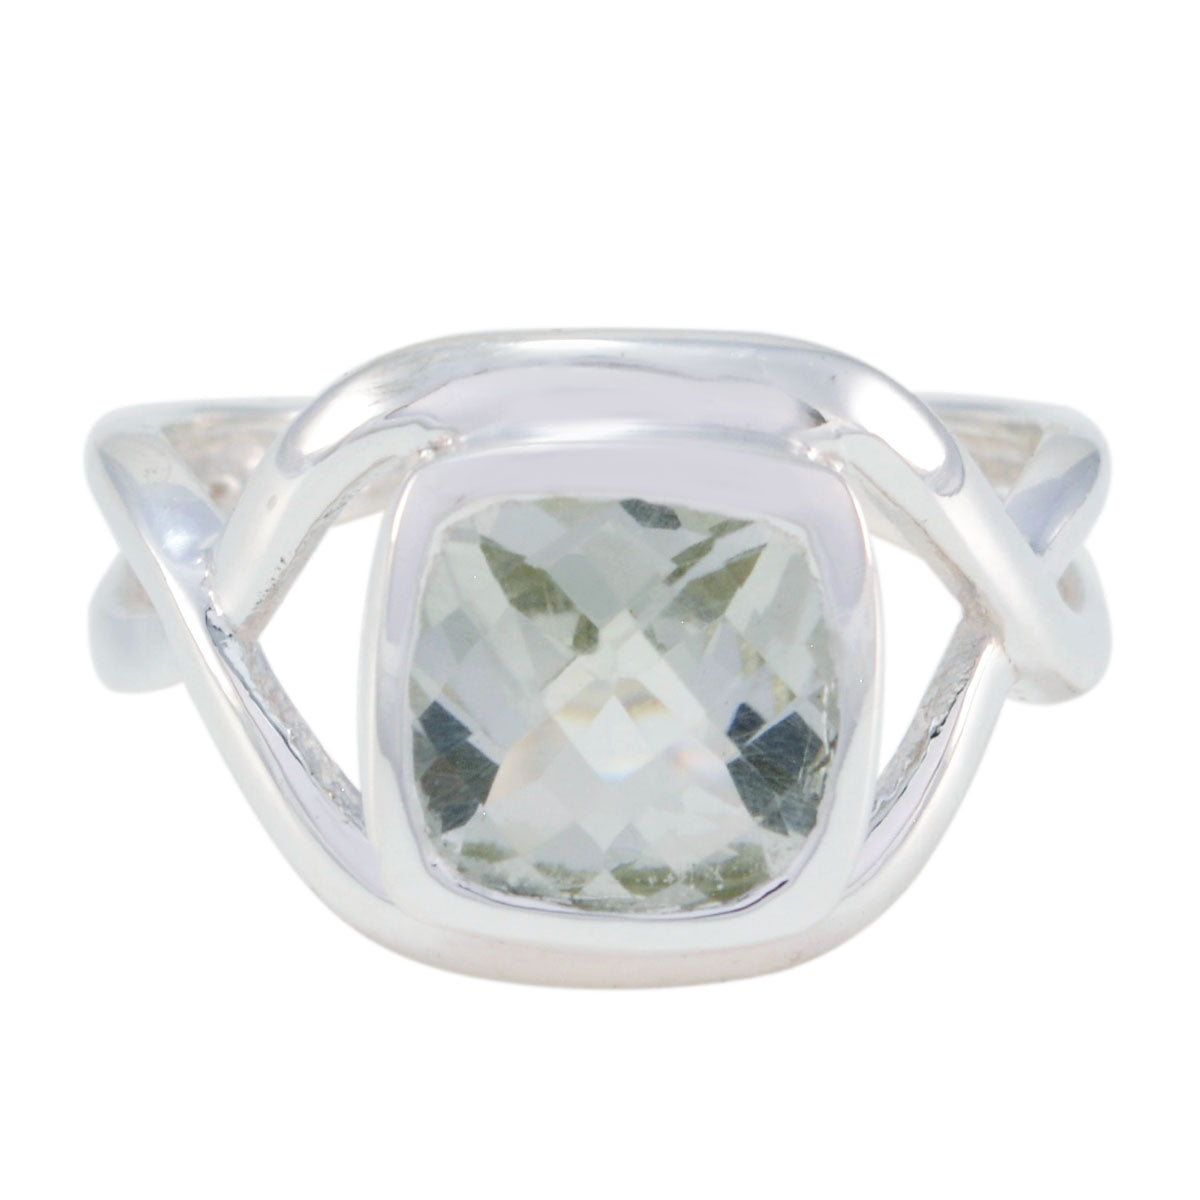 Exporter Gem Green Amethyst 925 Sterling Silver Ring Hot Topic Jewelry